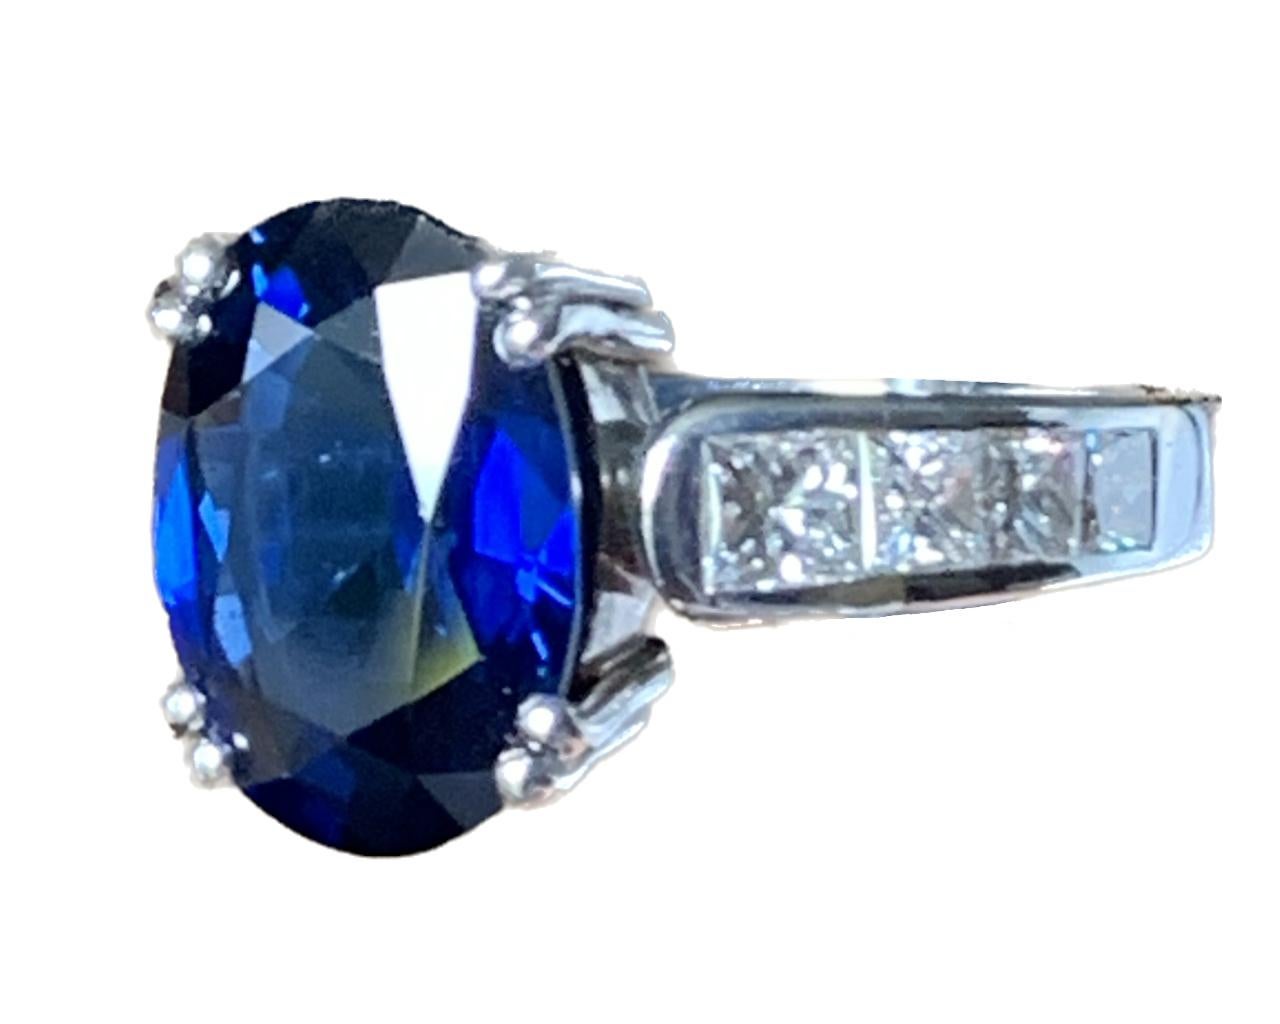 A ring with a 6.40ct. oval sapphire and 8 princess-cut diamonds weighing 1.06ct. in 18K white gold. 

Product Details
↣ Jewelry Type - Rings
↣ Style - Clasic
↣ Jewelry Main Material - 18K Yellow White

Stone Details
↣ Primary Stone Type: Sapphire
↣